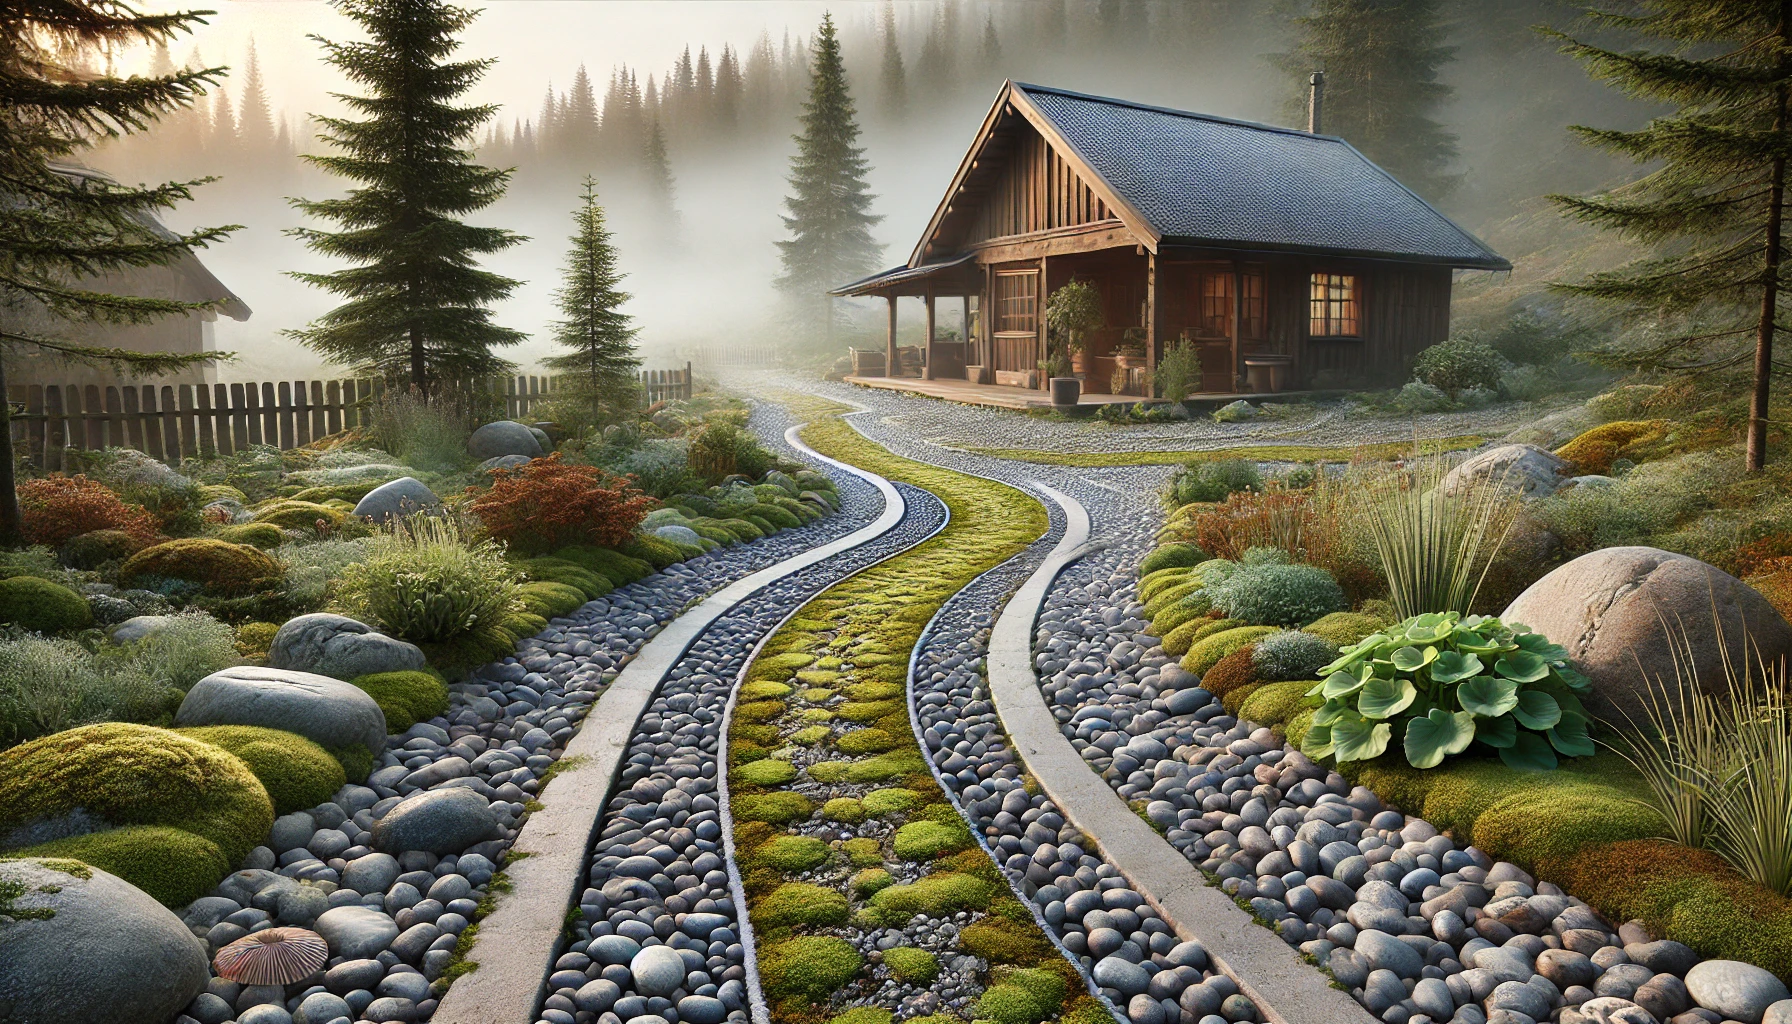 Misty forest cabin with landscaped stone path.